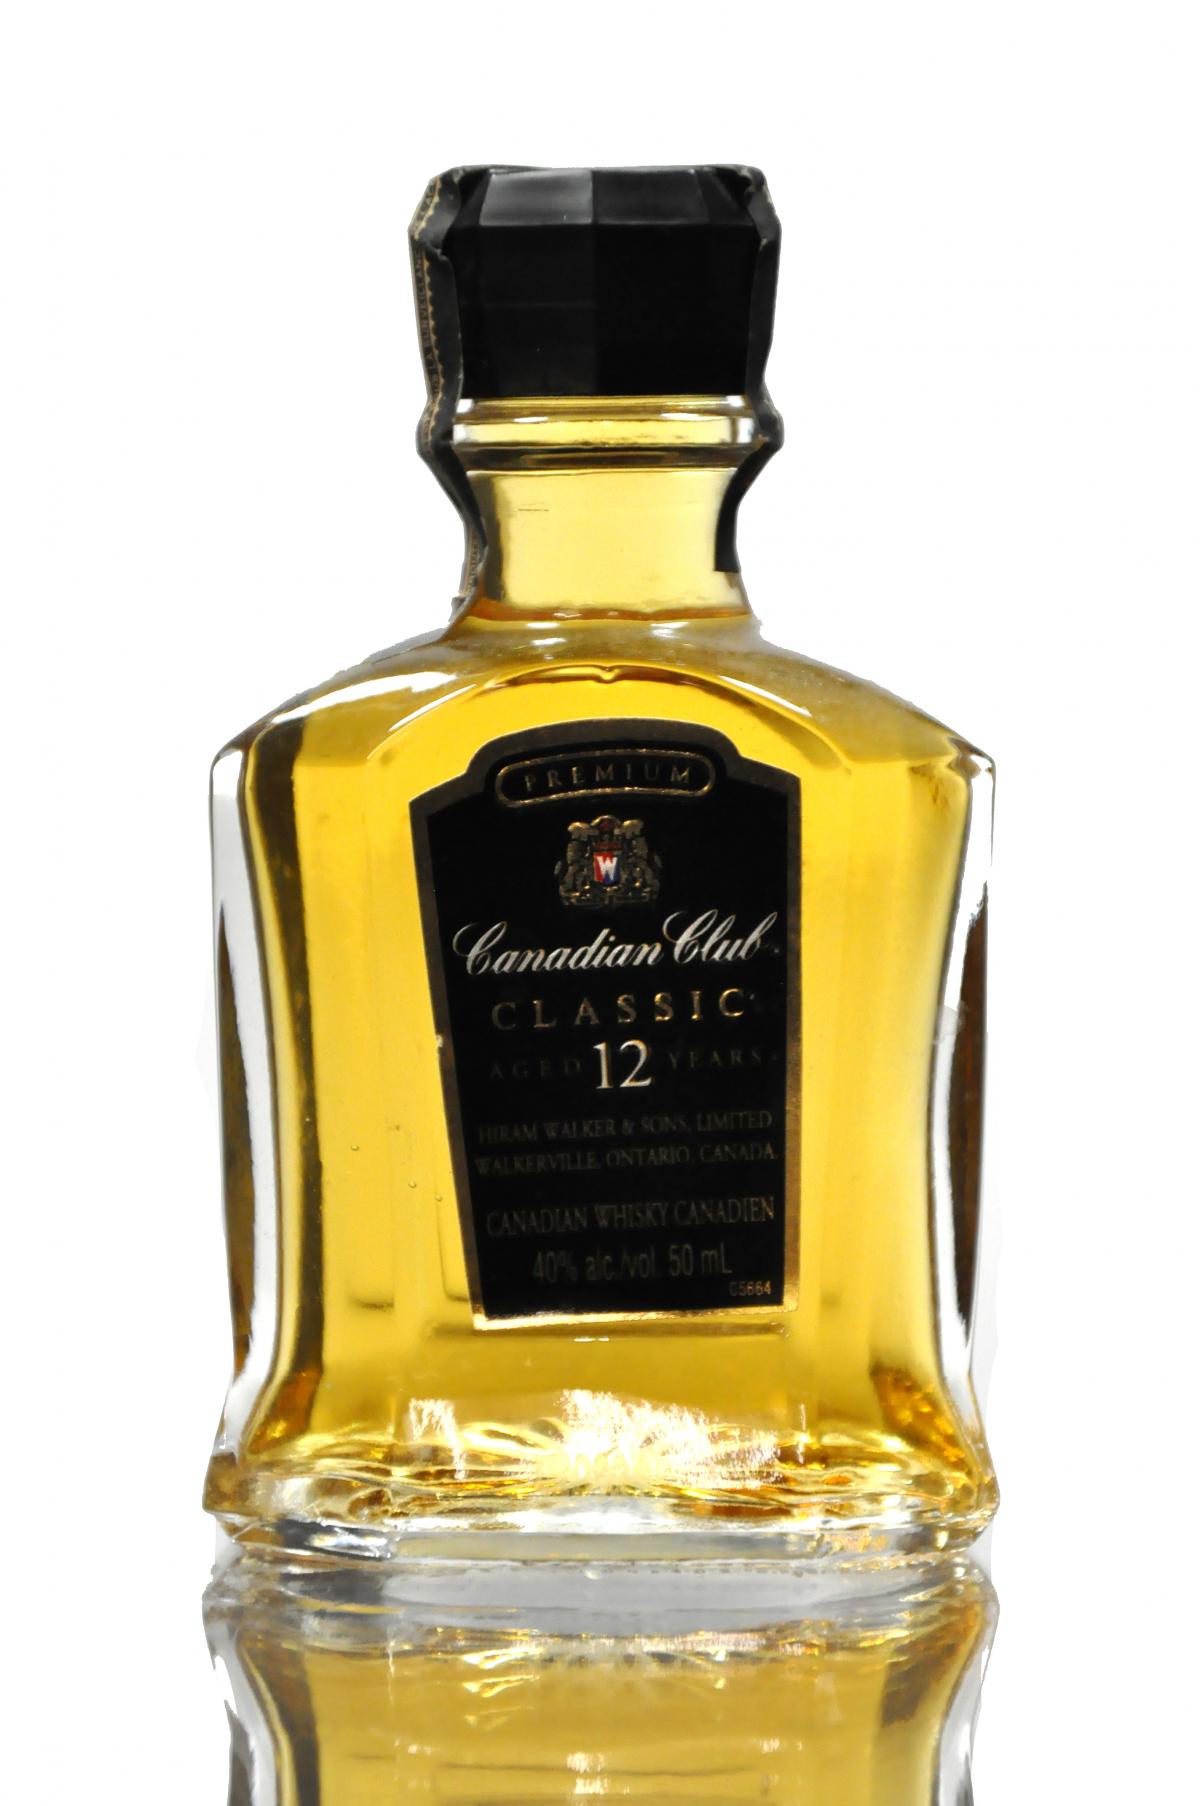 Canadian Club Classic - 12 Year Old Miniature